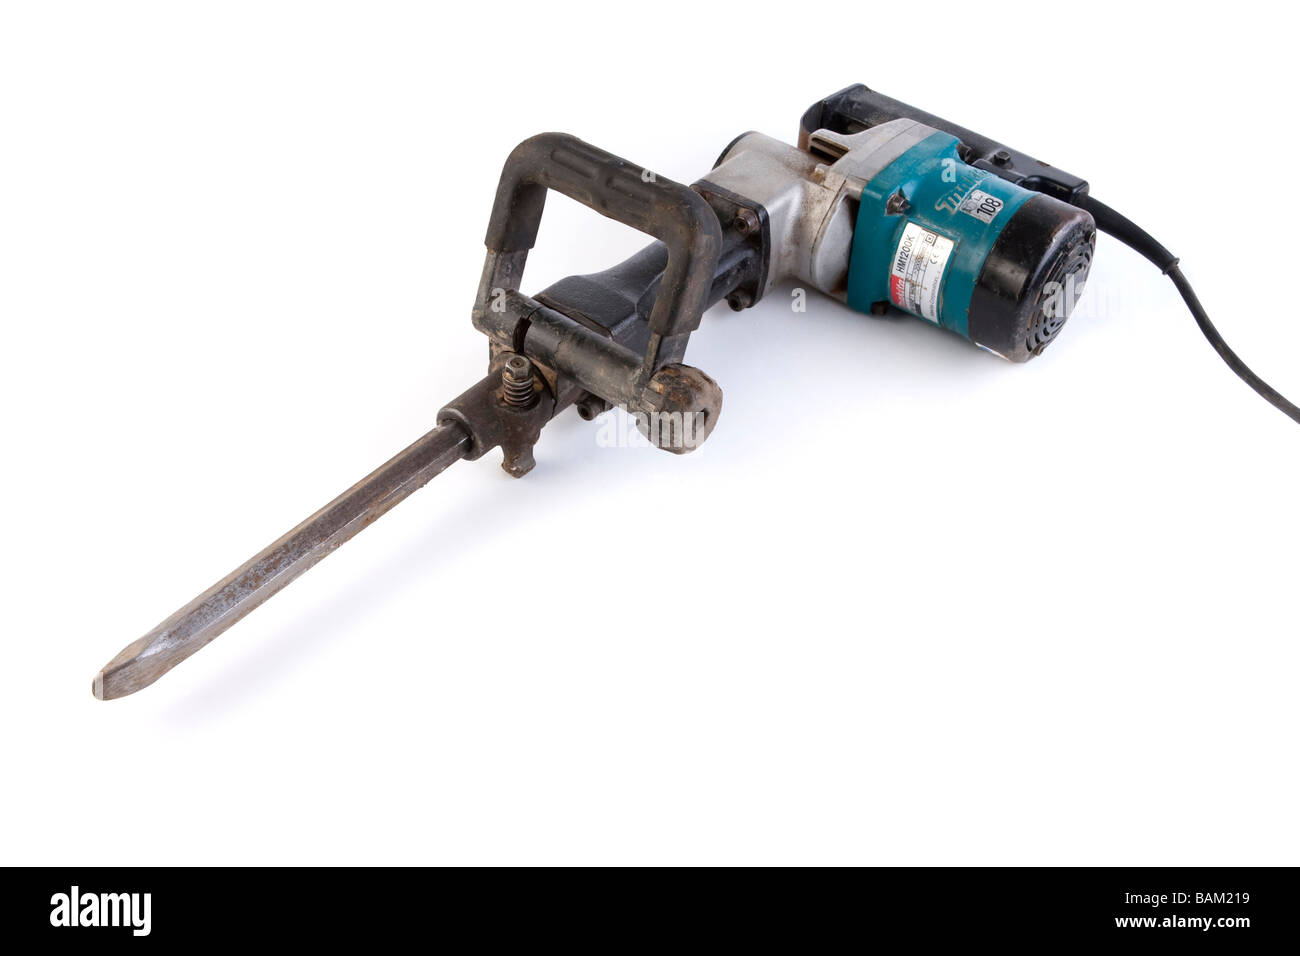 Makita electric demolition breaker drill with chisel for breaking ...